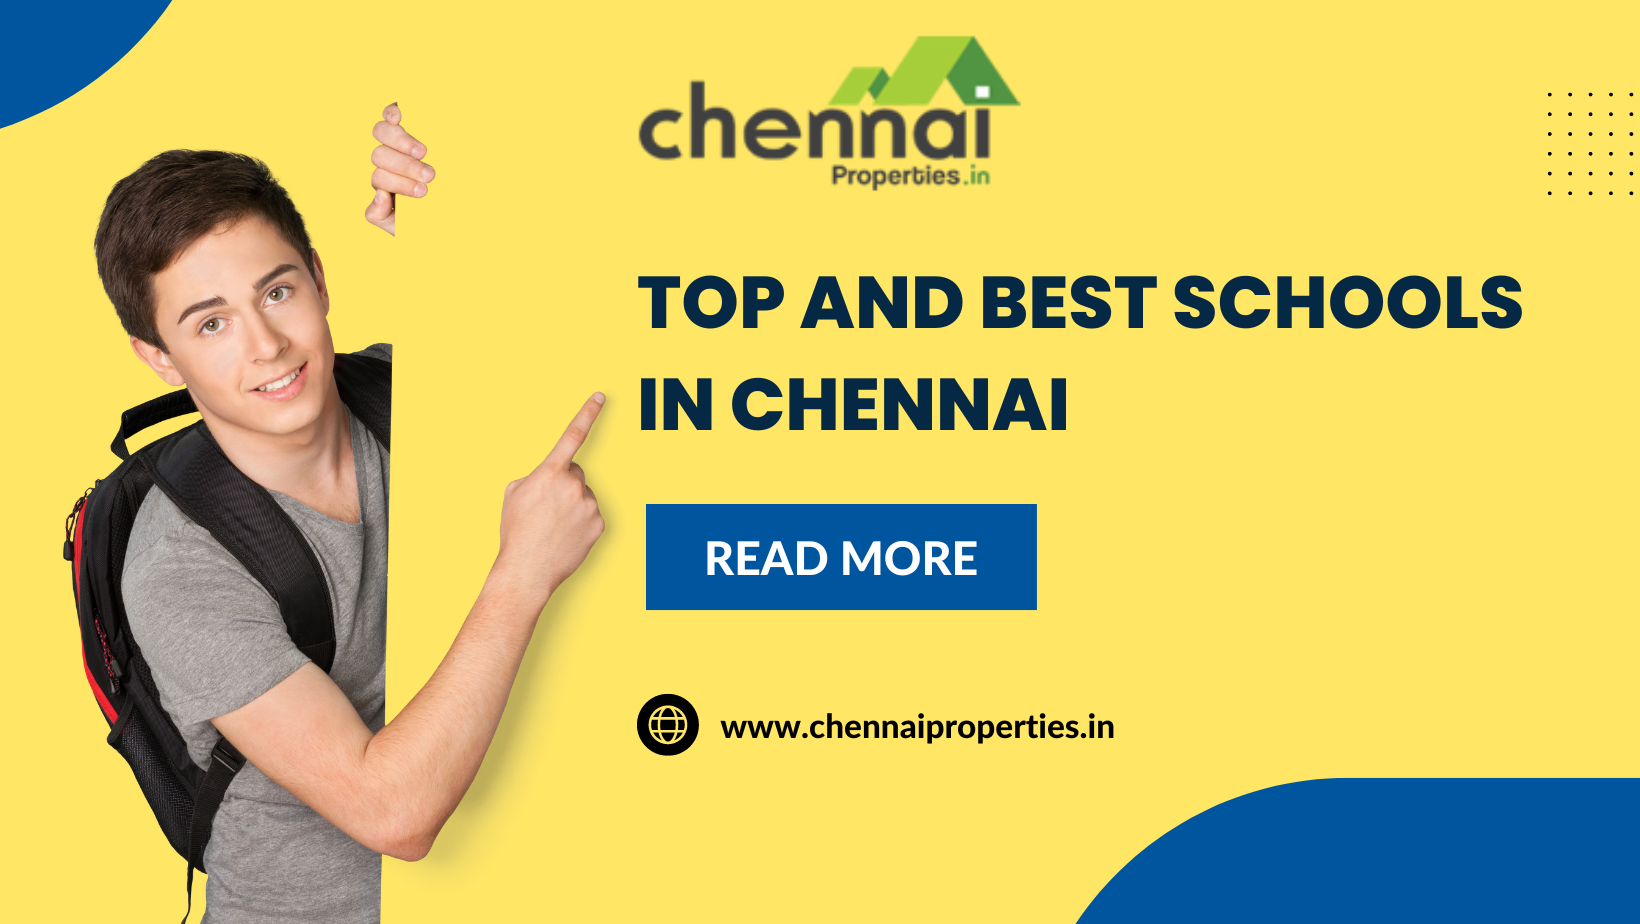 Top and Best Schools in Chennai